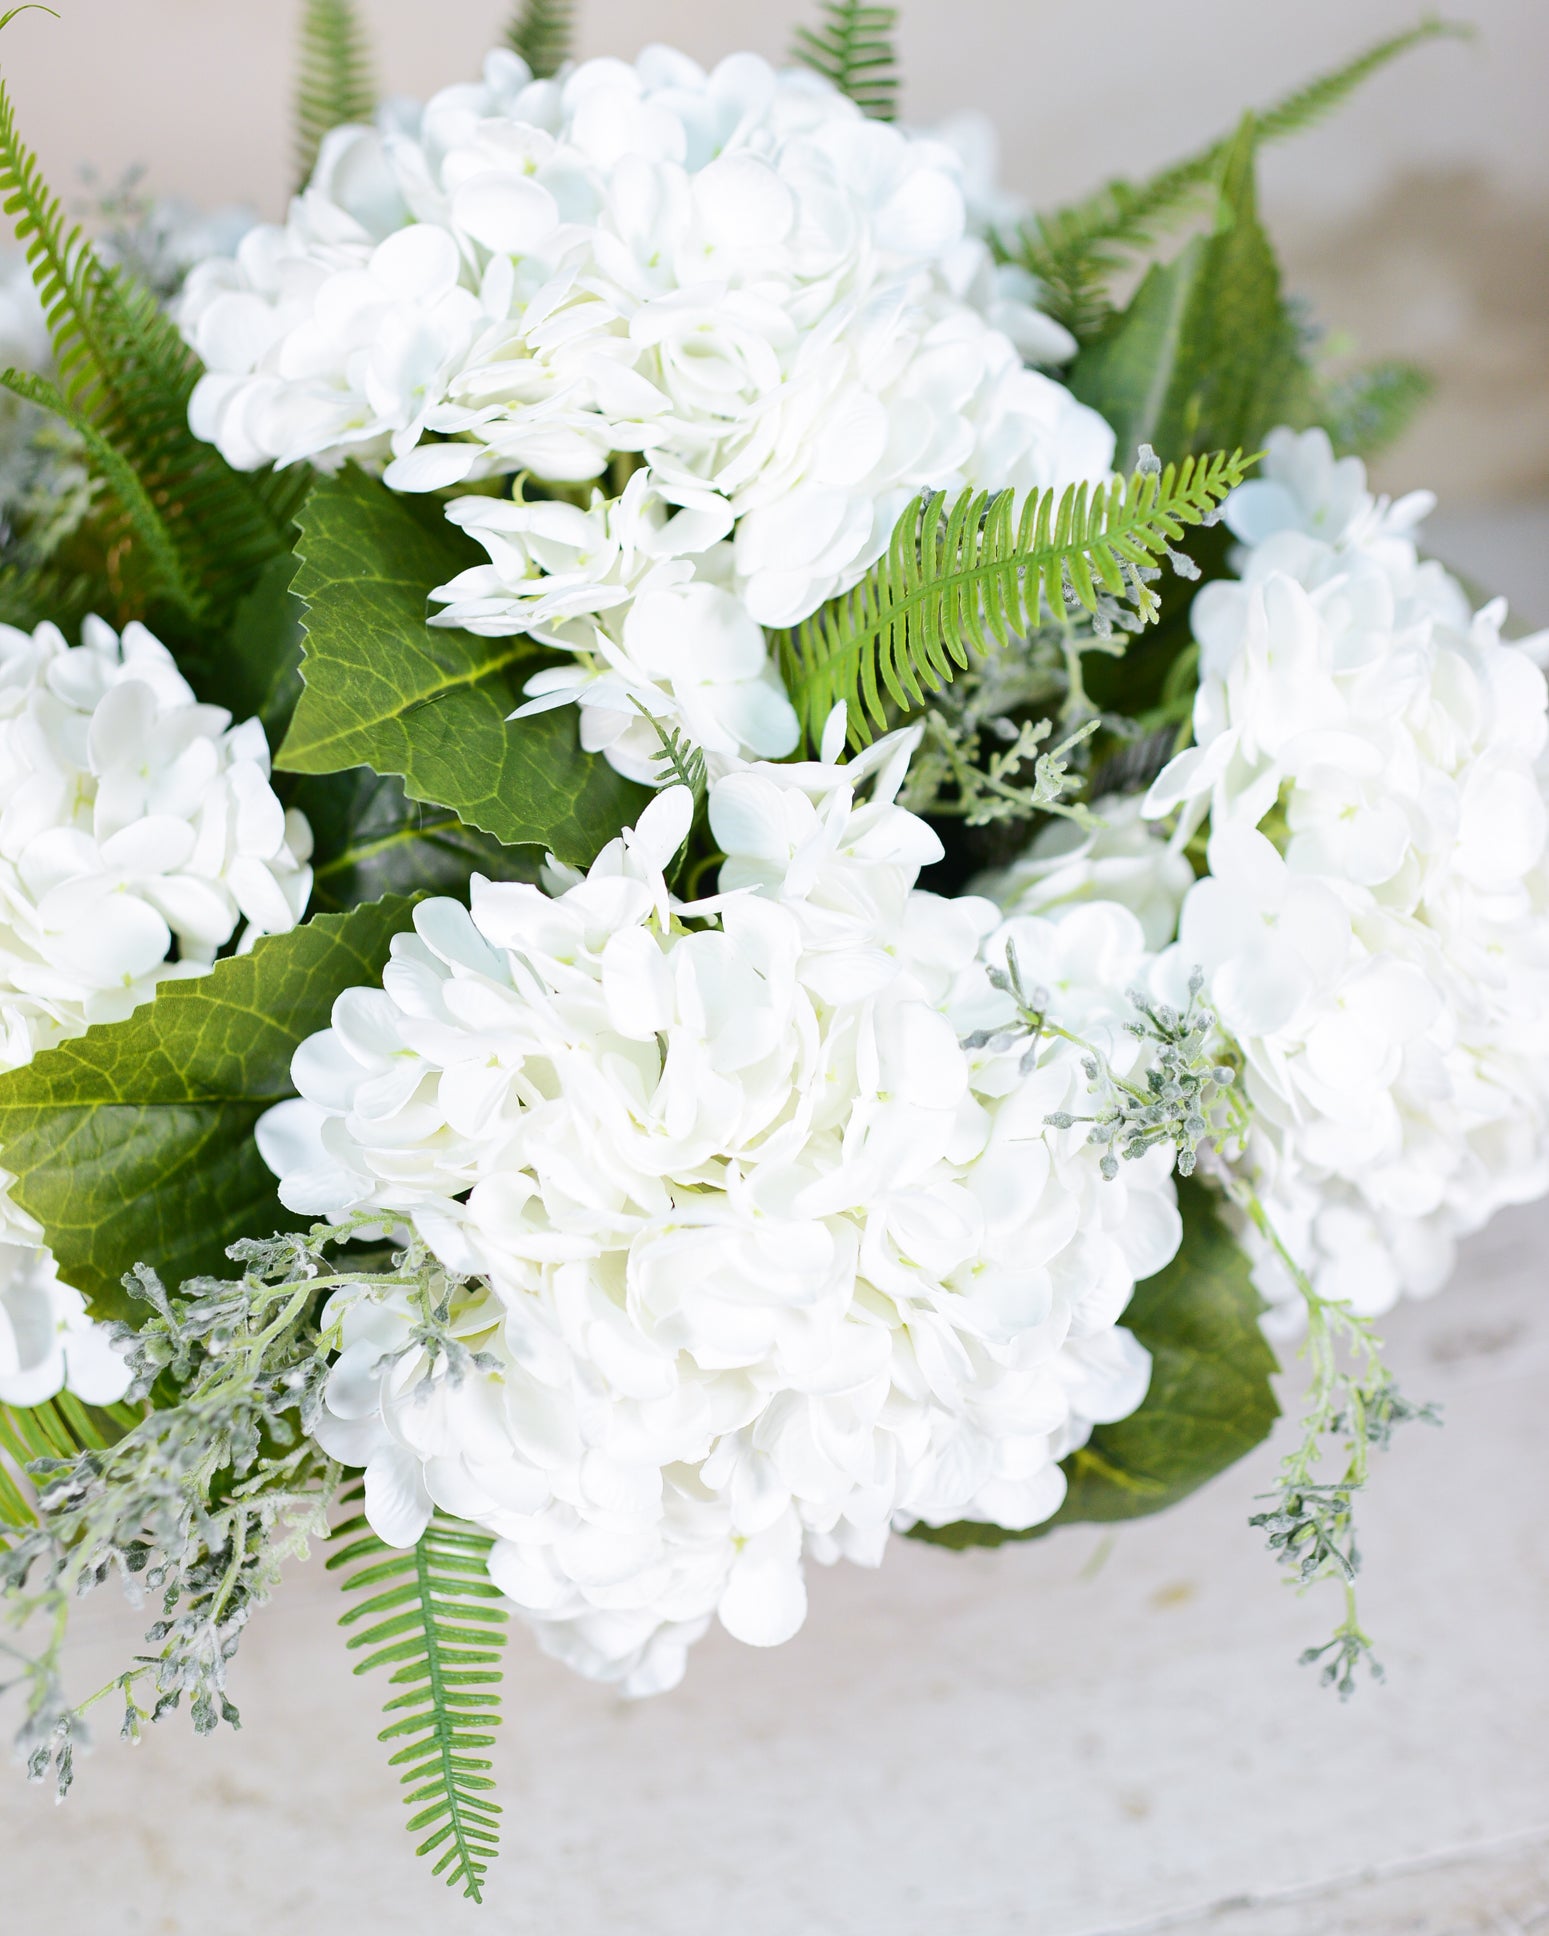 Real Touch White Hydrangea Centerpiece Drop In